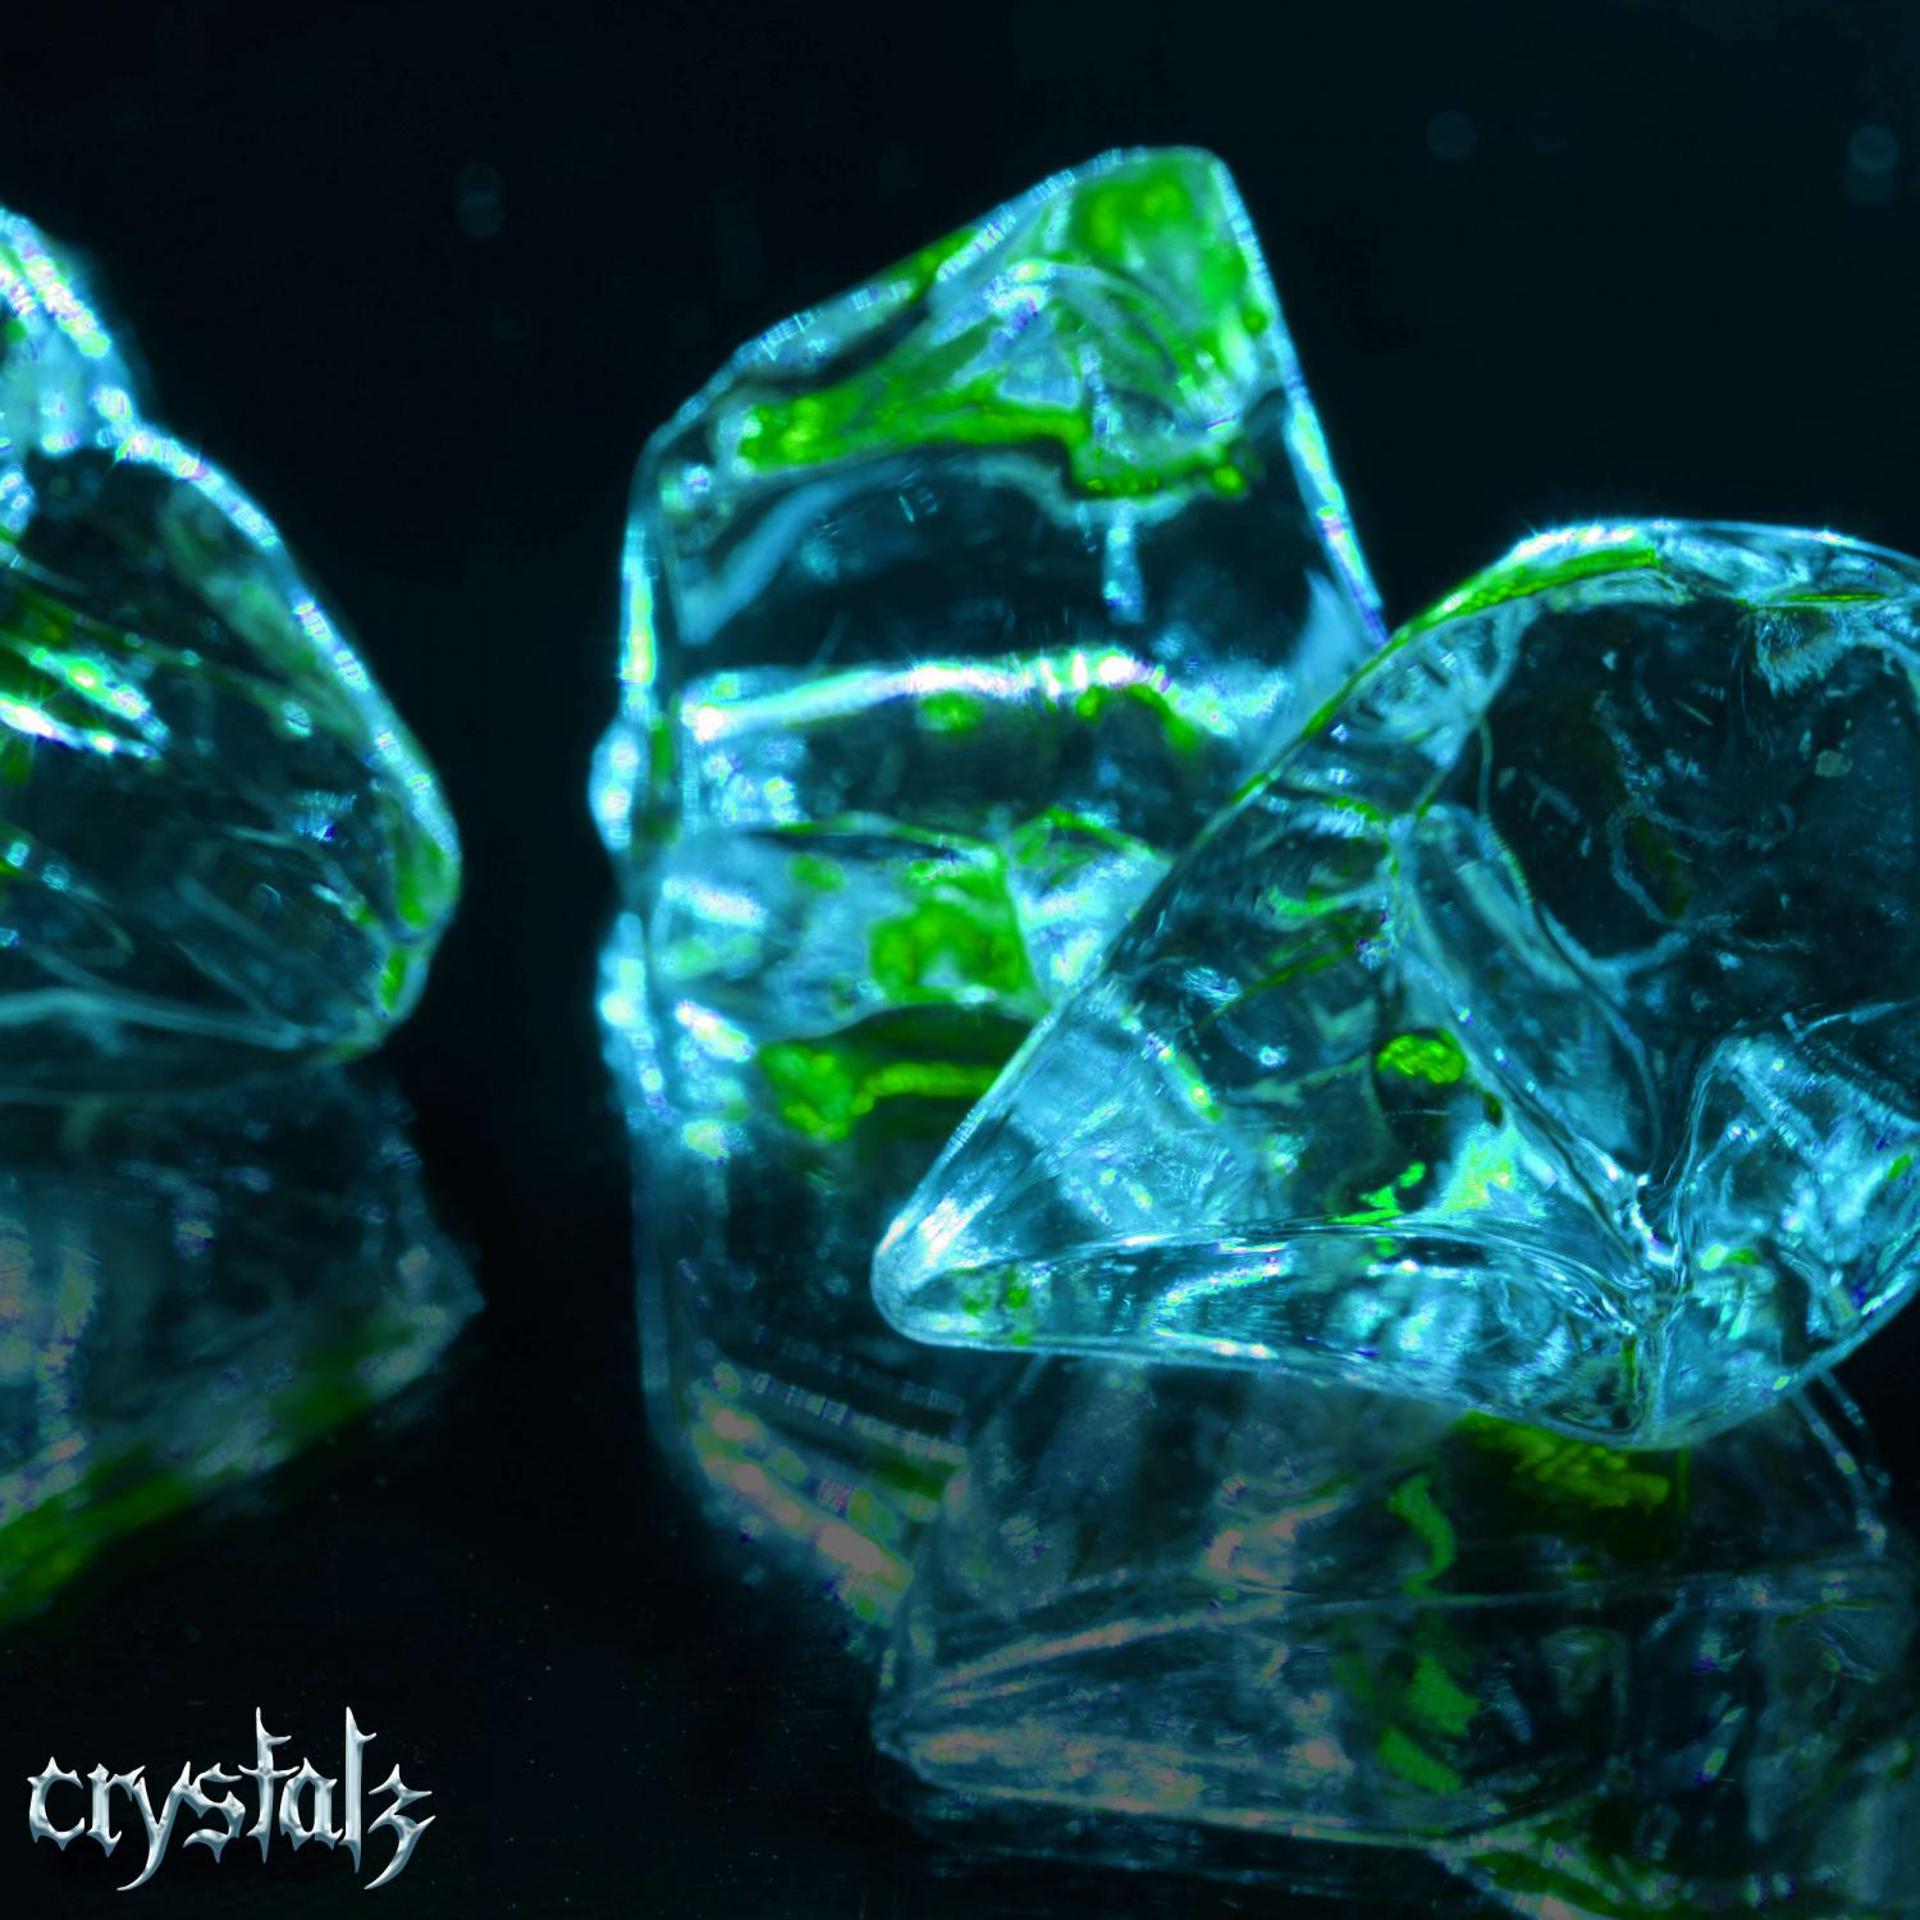 Isolate exe crystals reverb. Crystals isolate ФОНК. Crystals isolate.exe. Phonk - Crystal - isolate. Crystals pr1svx.